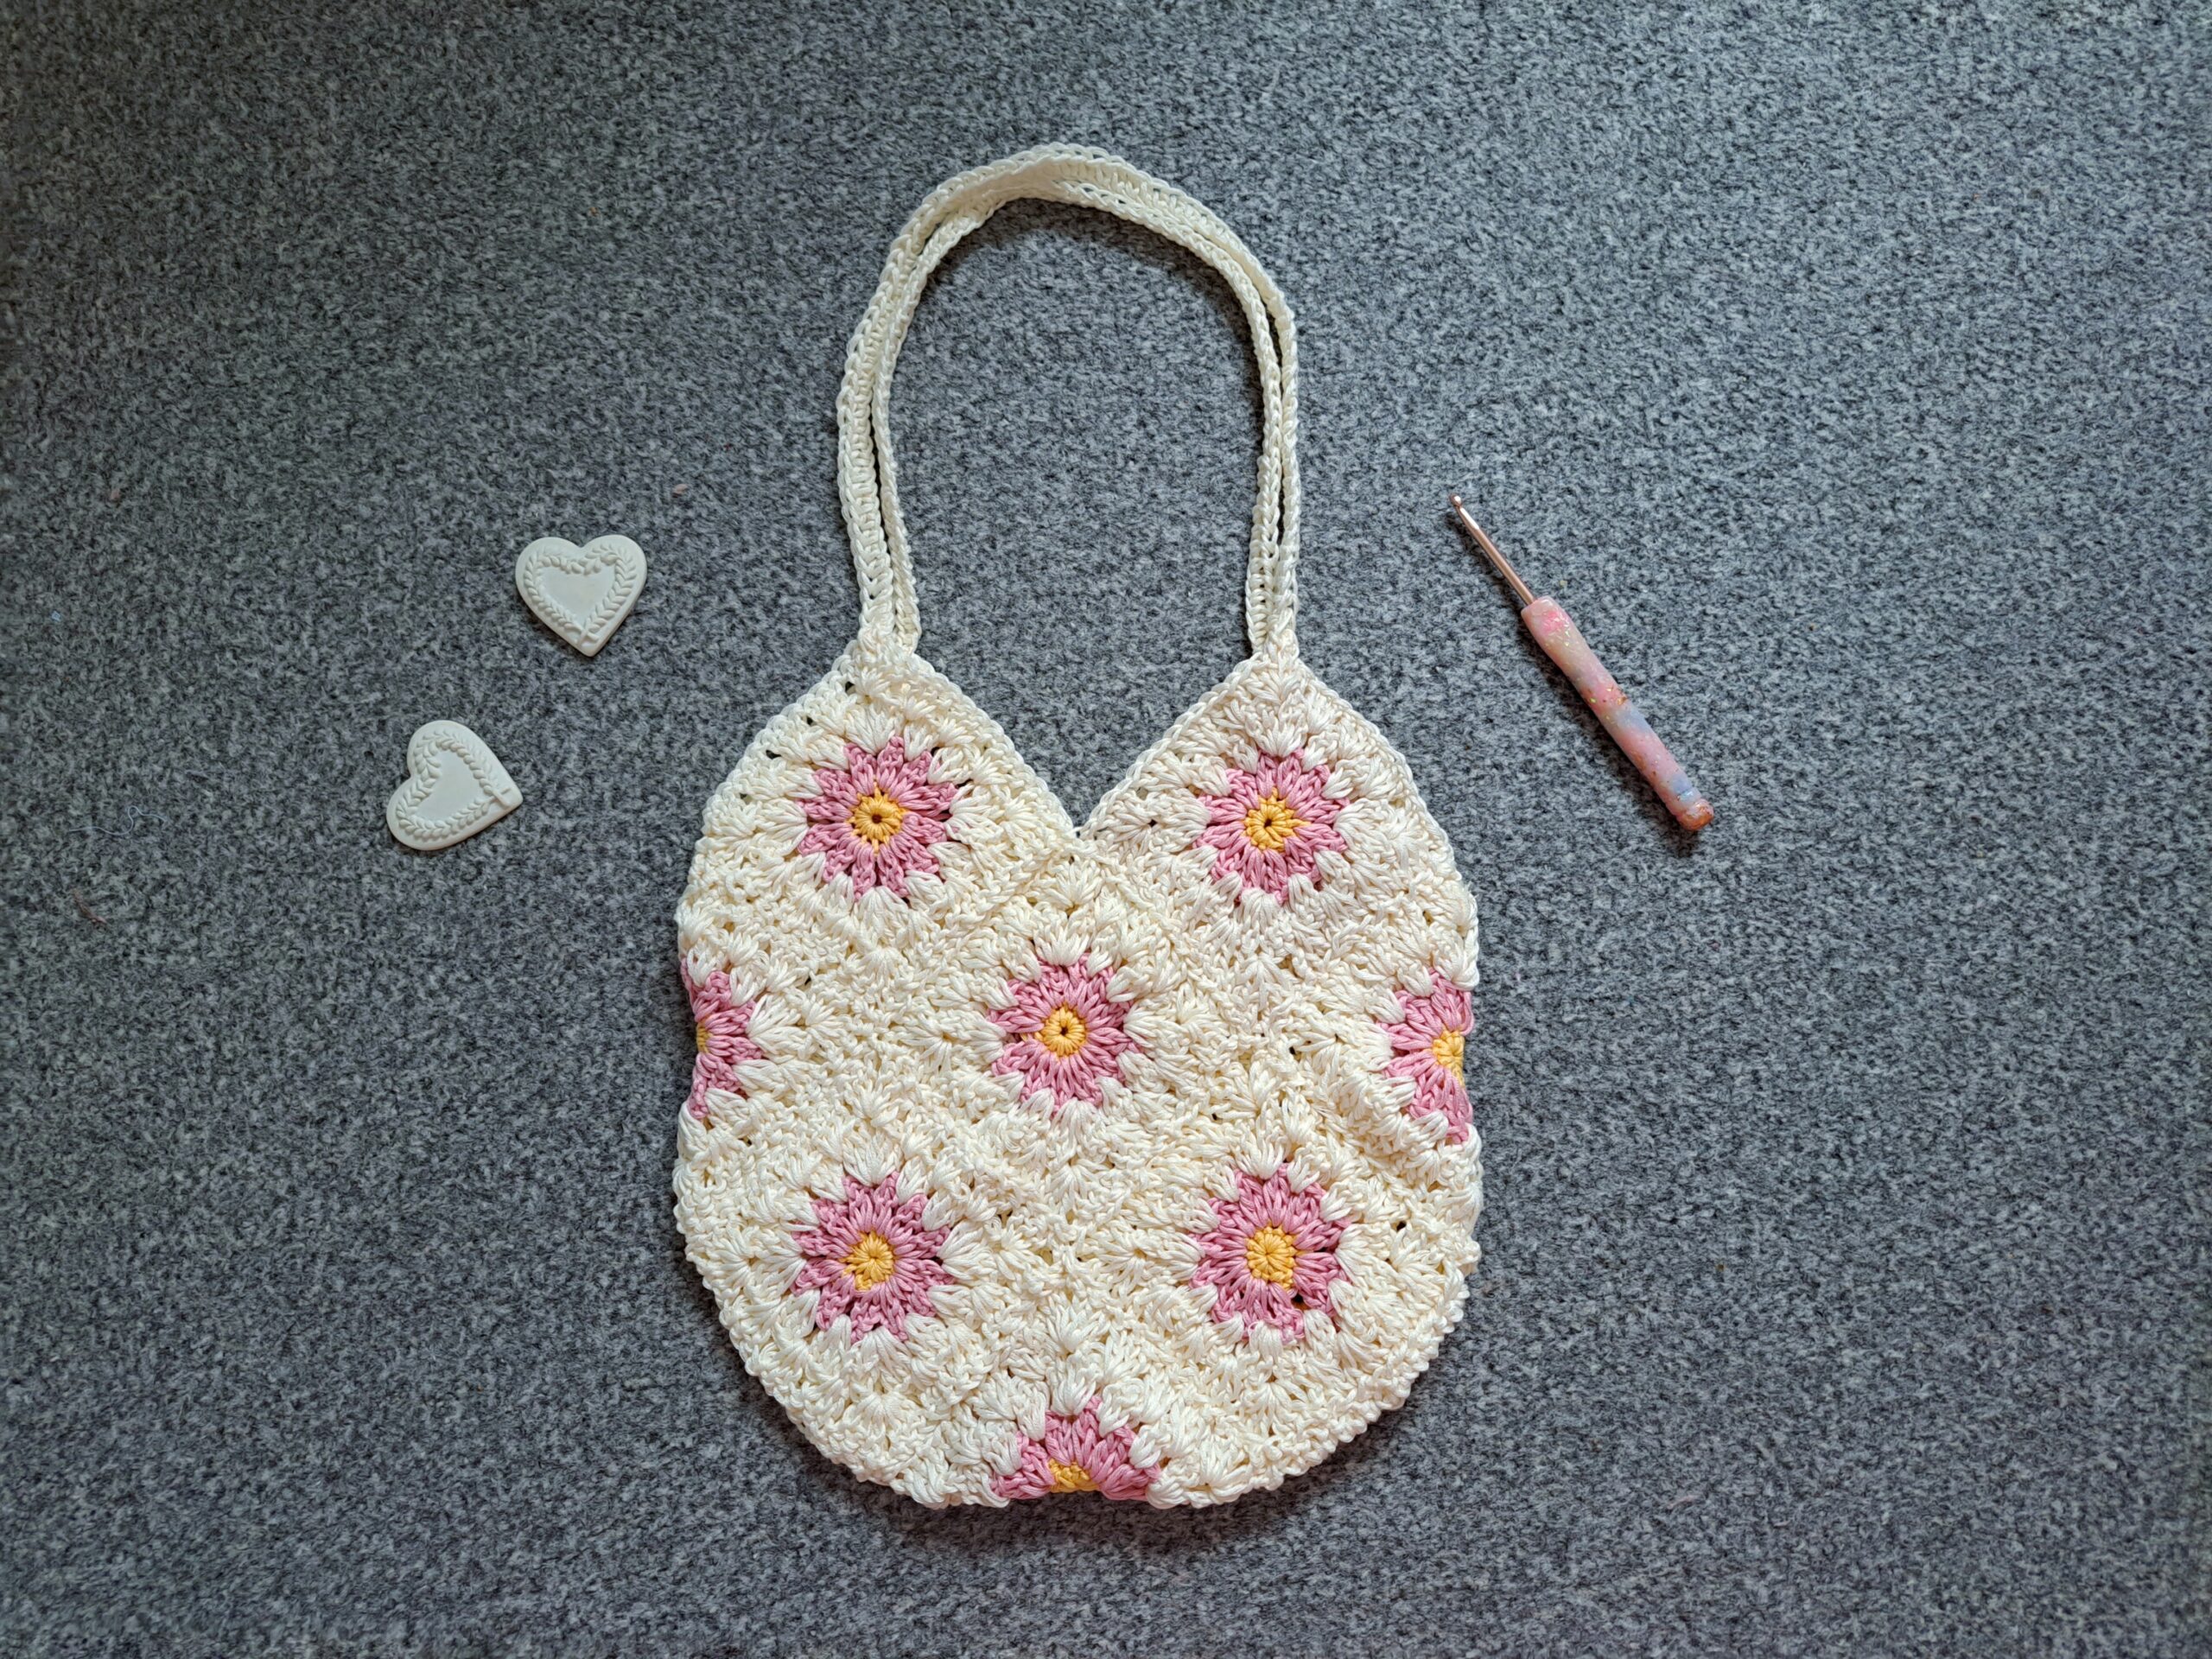 Buy Citrusly Granny Square Tote Bag Crochet Pattern Online in India - Etsy